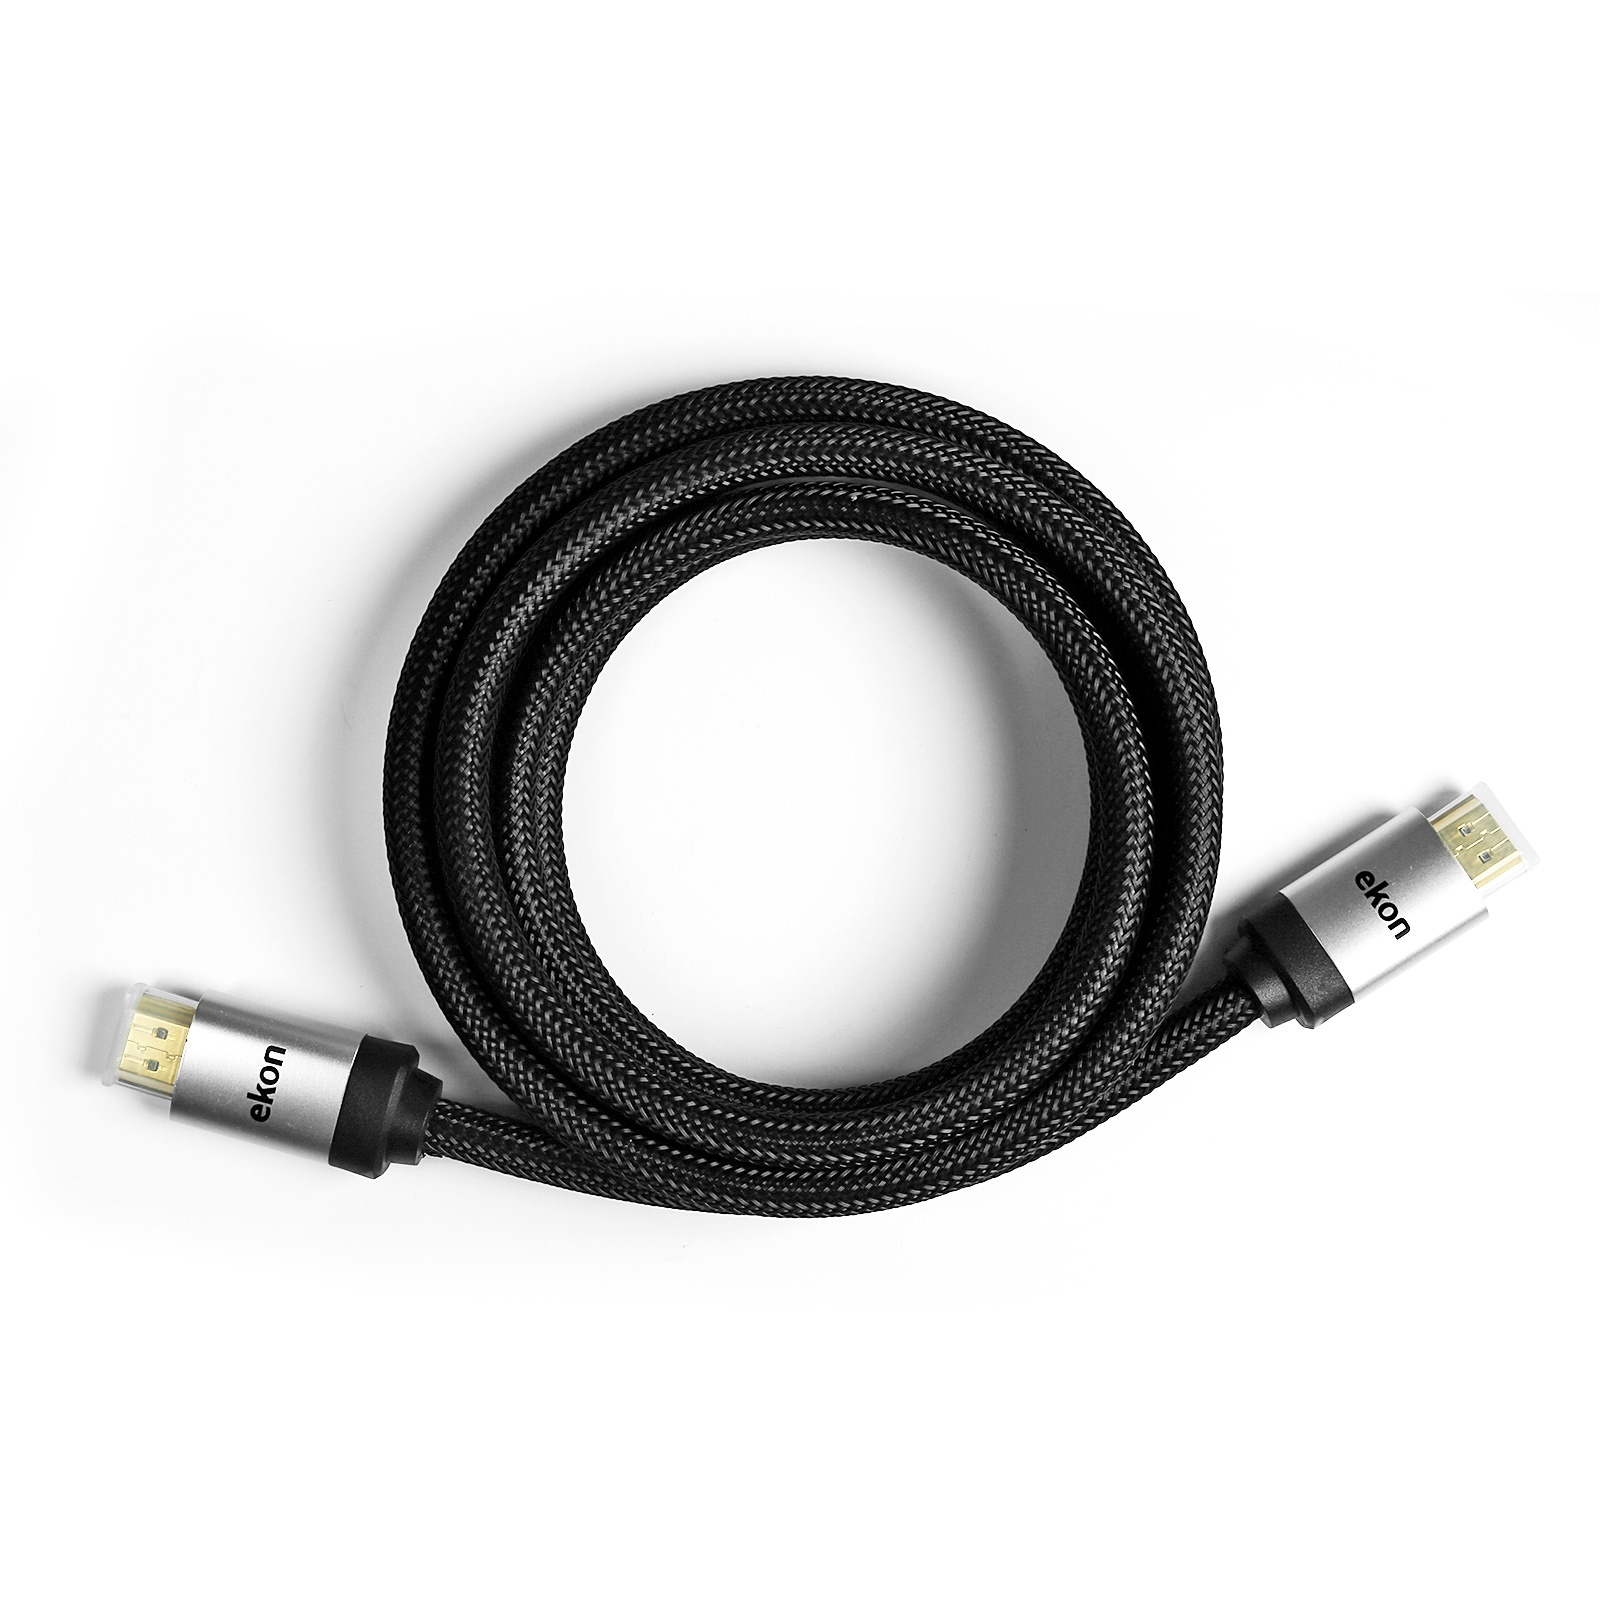 EKON HDMI V 2.0 cable male to male high speed with ethernet, 4K. OD 7.3mm.  Conductor pure copper,28 AWG, jacket with cotton. Connector metal shell    and gold plated. Shielding: Al-foil with al-mg braid. + ferrite core. Total Lenght 0,80 m